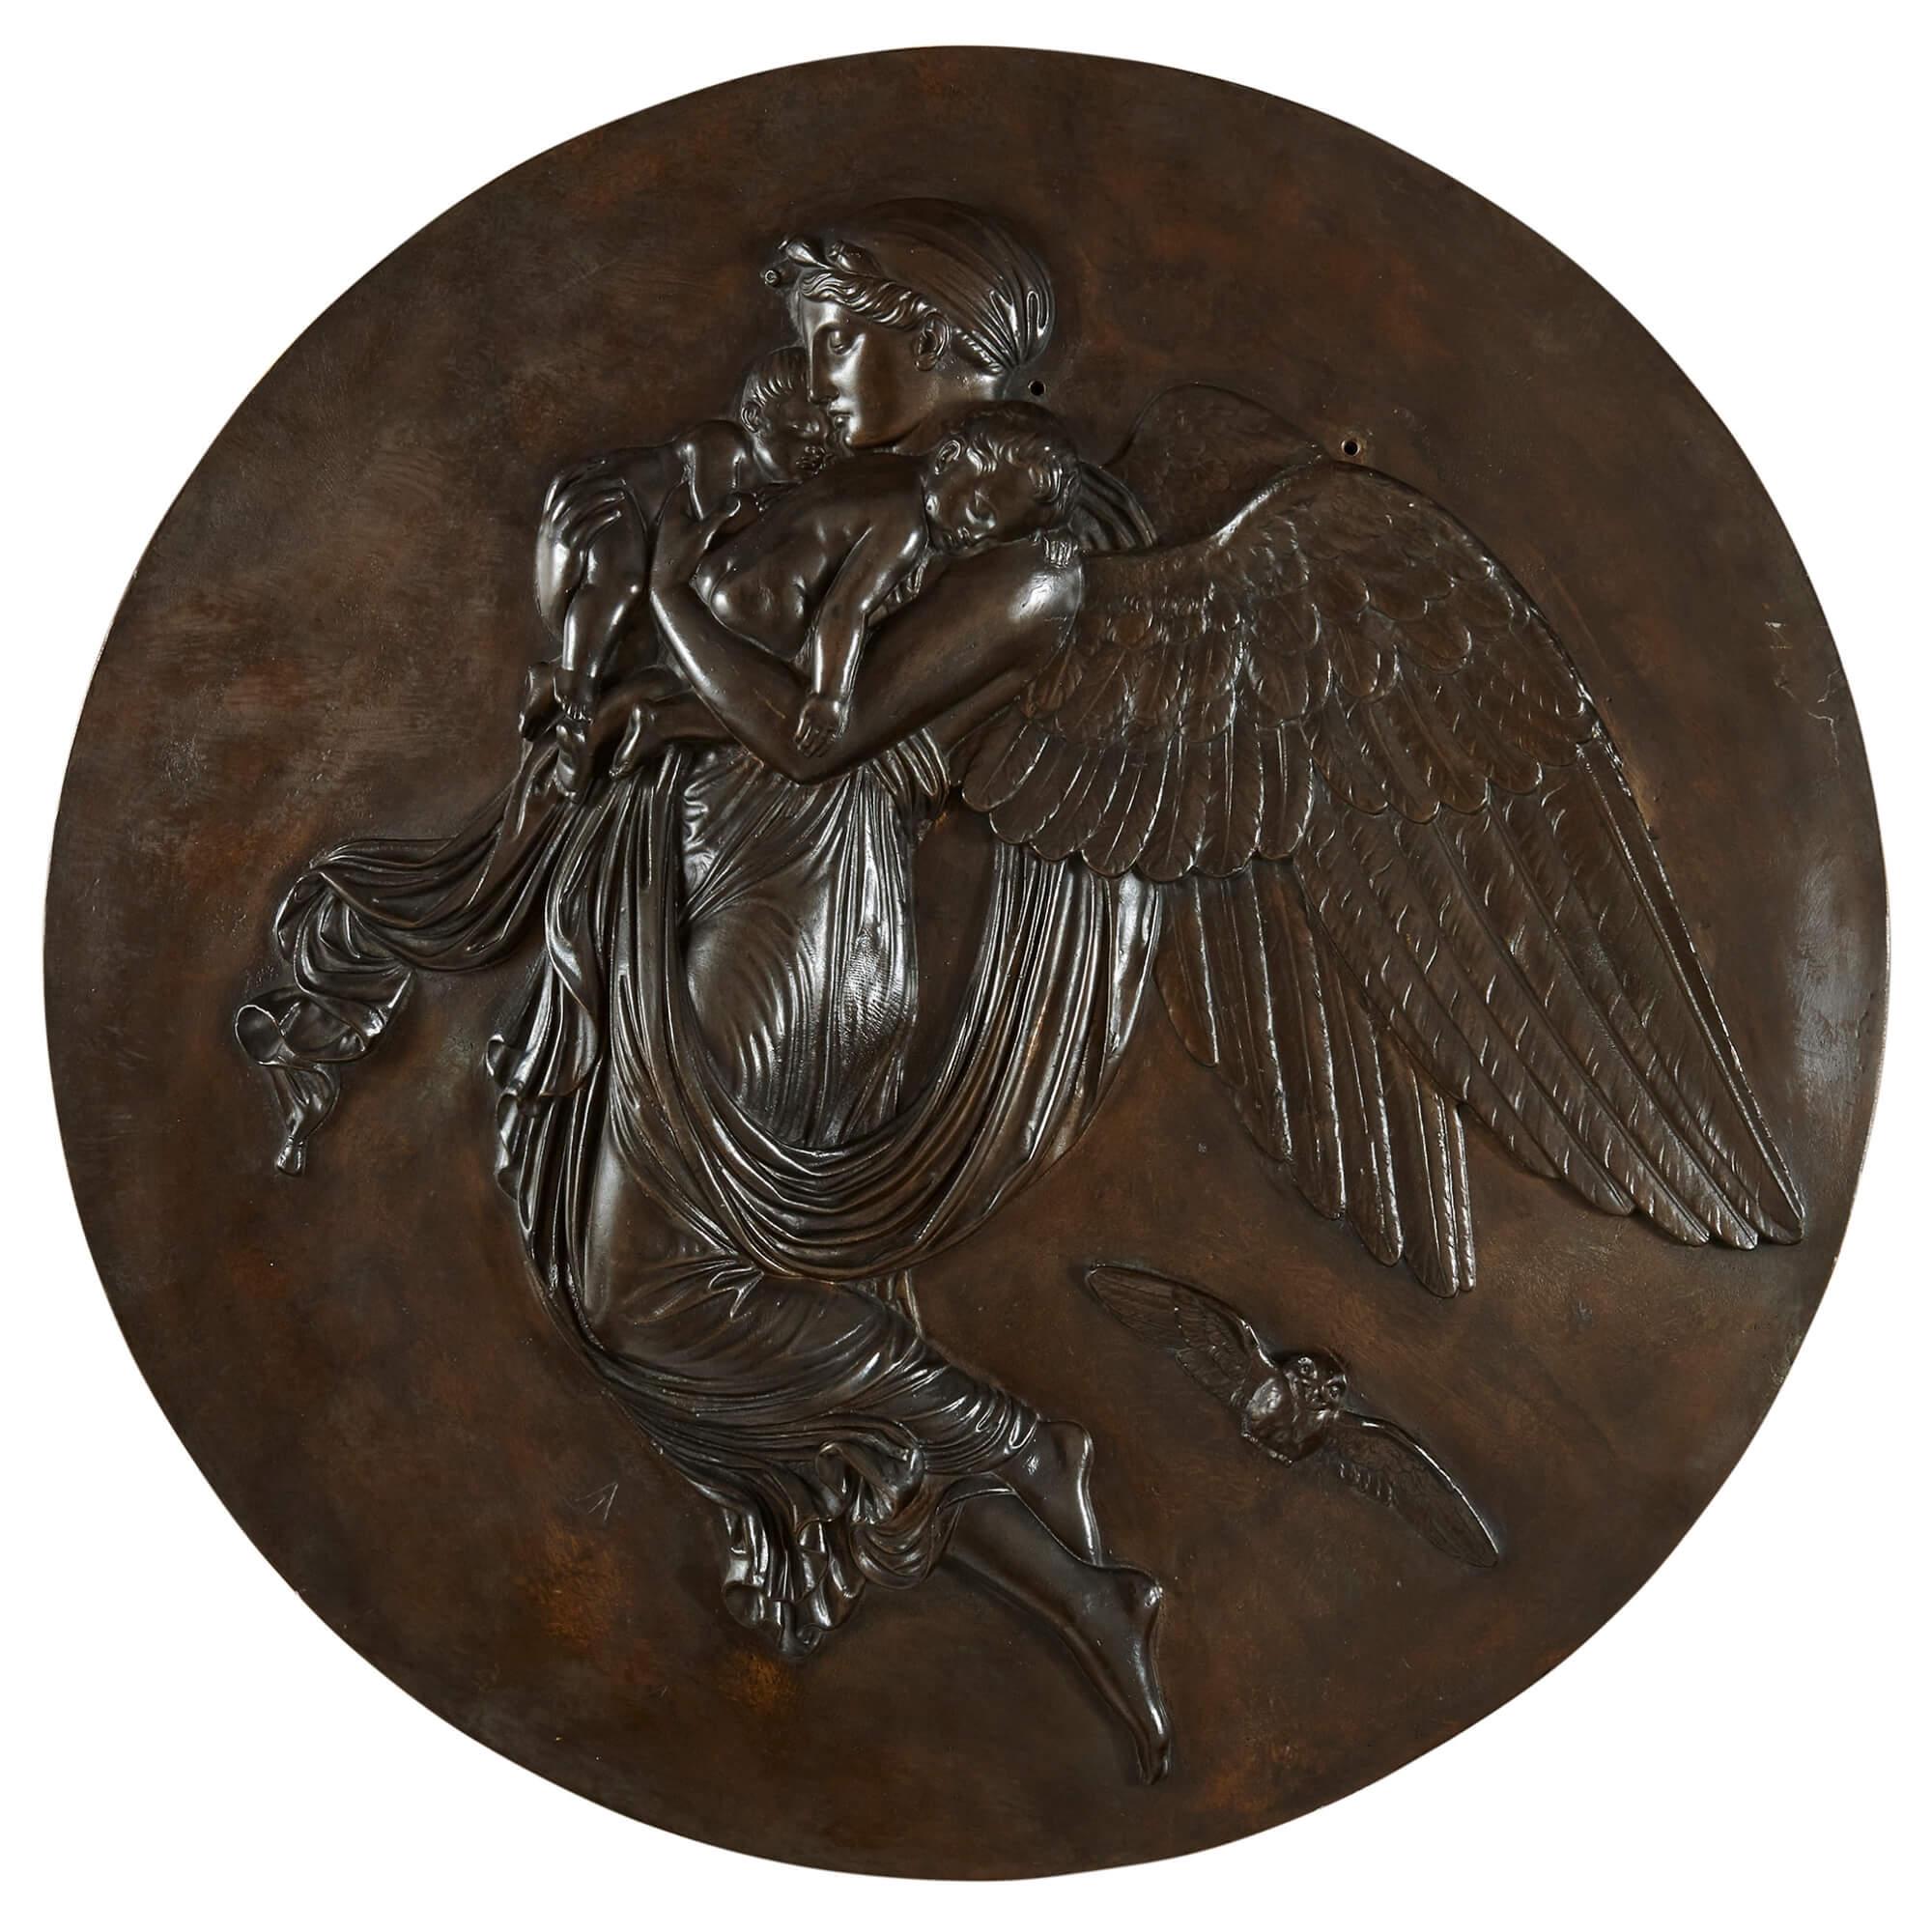 A pair of patinated bronze antique plaques of Night and Day
French, Late 19th Century
80cm in diameter, 5cm in depth

Modelled after Bertel Thorvaldsen's iconic 'Night and Day' reliefs, these roundels are a superb rendering in bronze of one of the